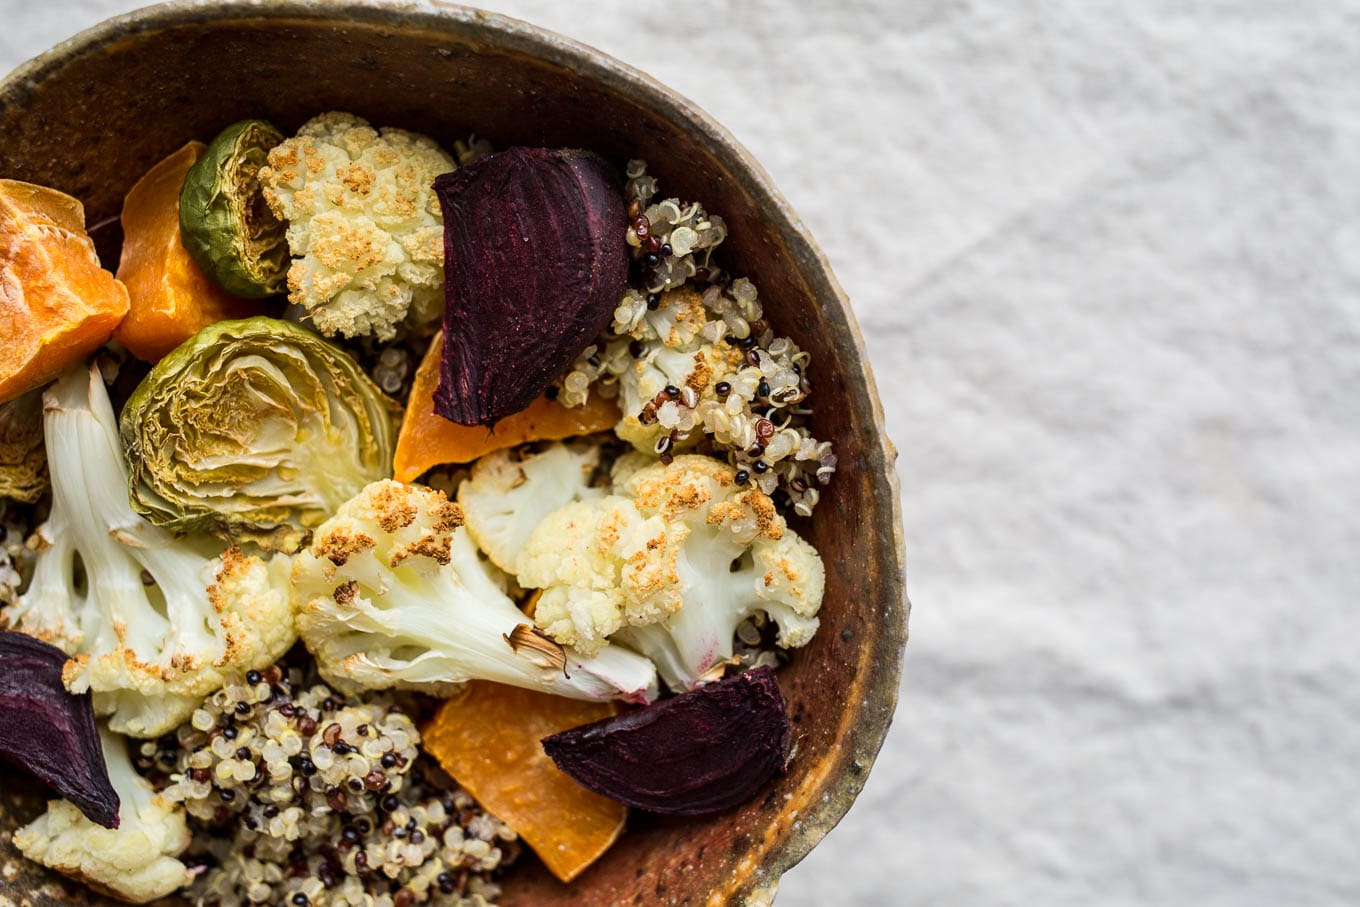 Roasted Vegetable and Quinoa Bowl with Coconut-Almond Sauce (gluten-free) | saltedplains.com